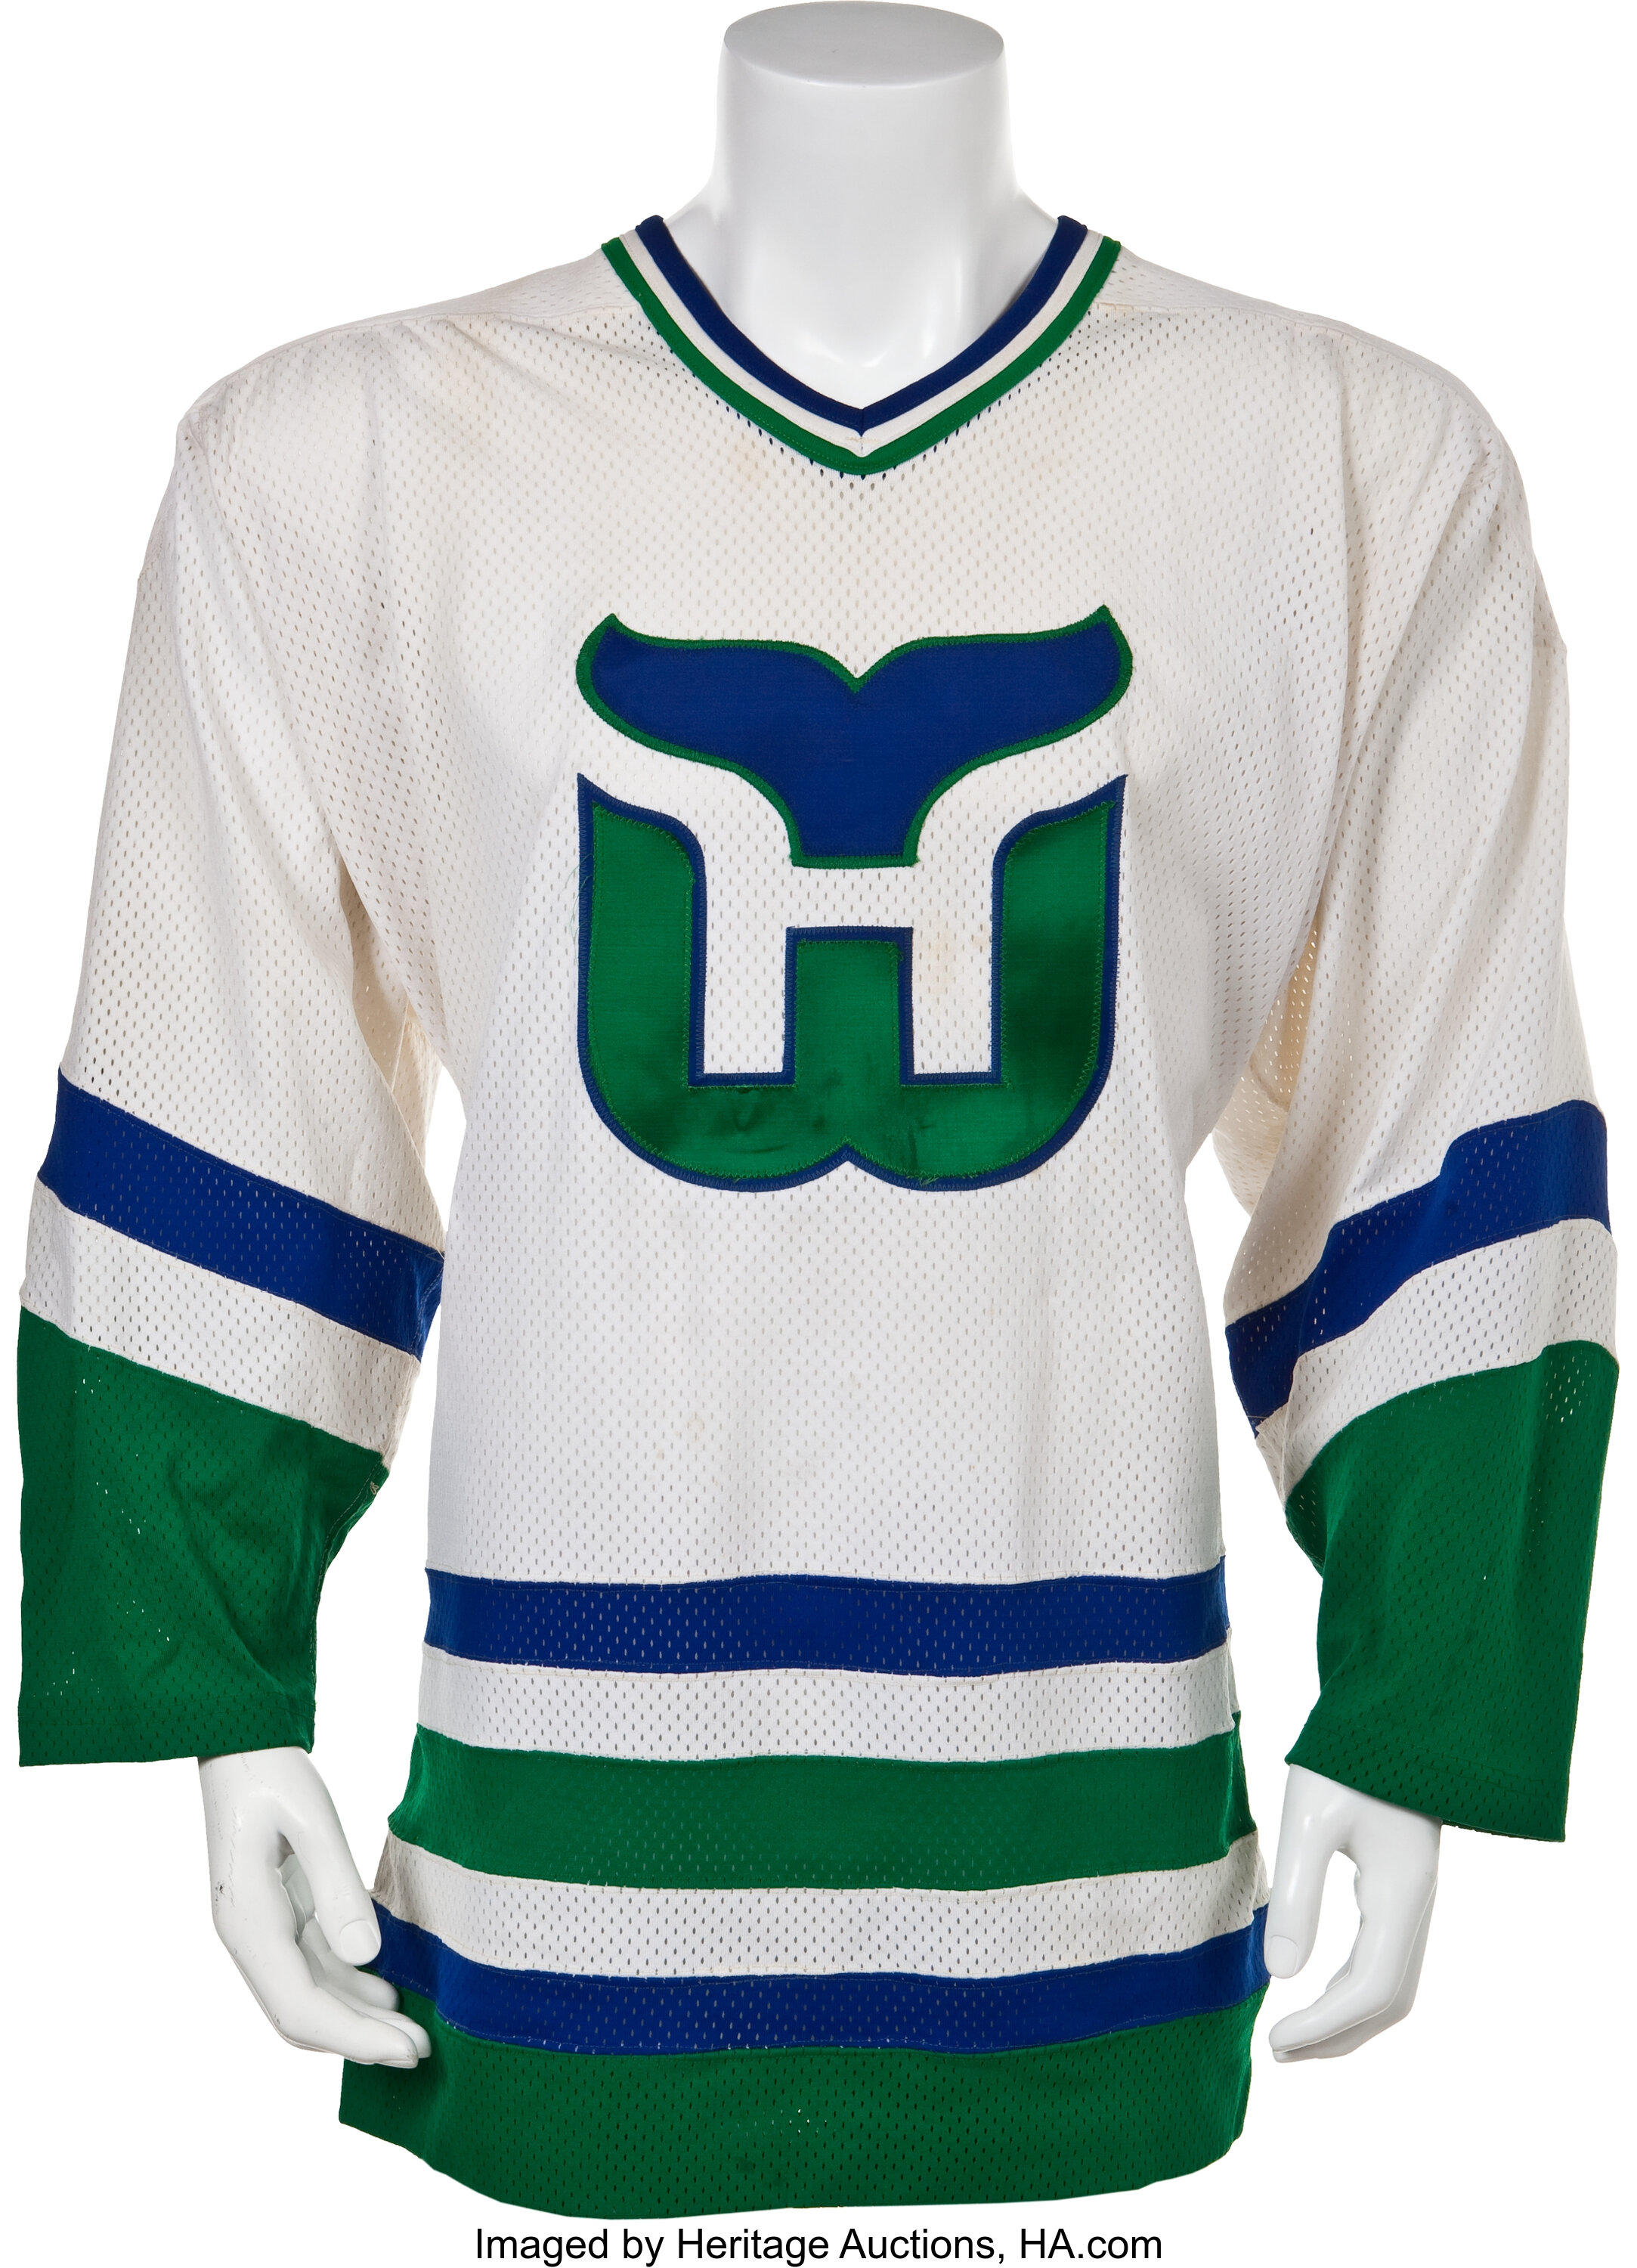 CalderCup2000's Game Worn Hartford Whalers Jersey Collection